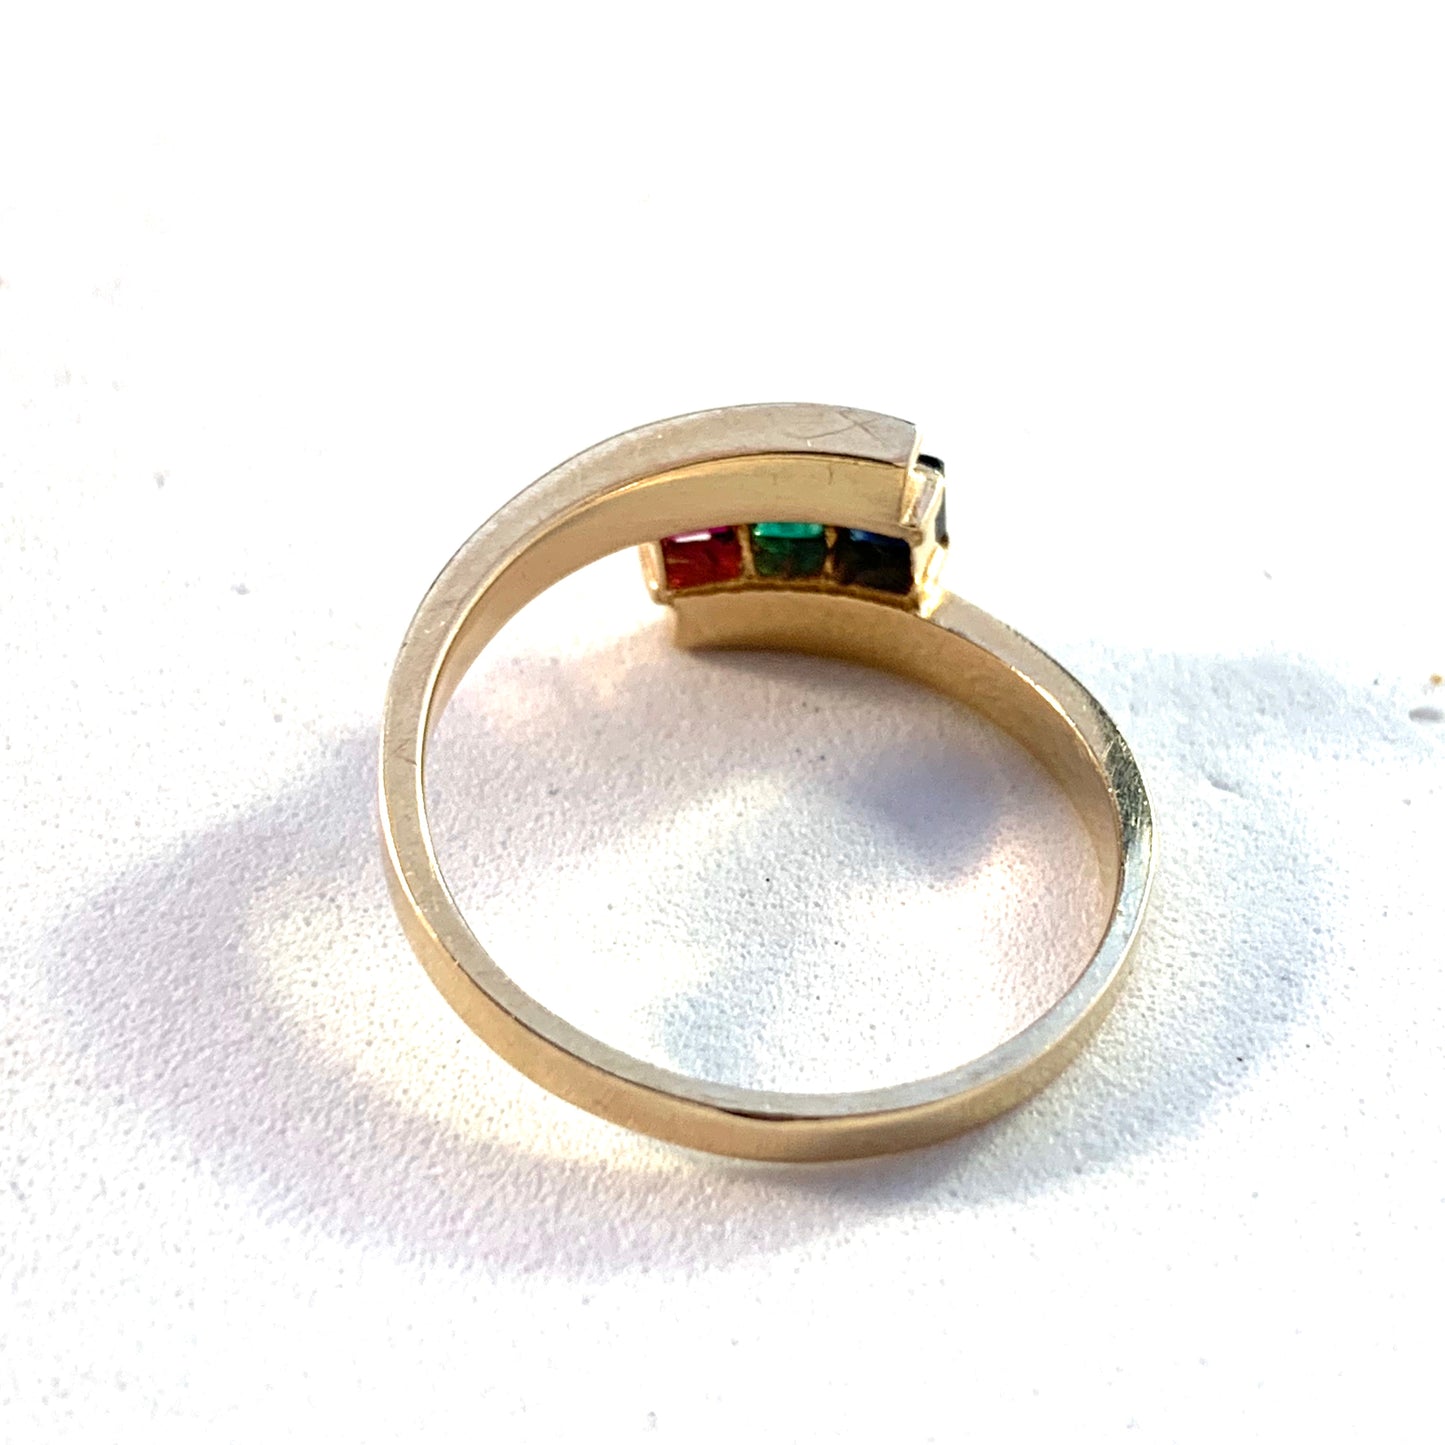 Vintage 14k Gold Synthetic Emerald, Sapphire Ring.